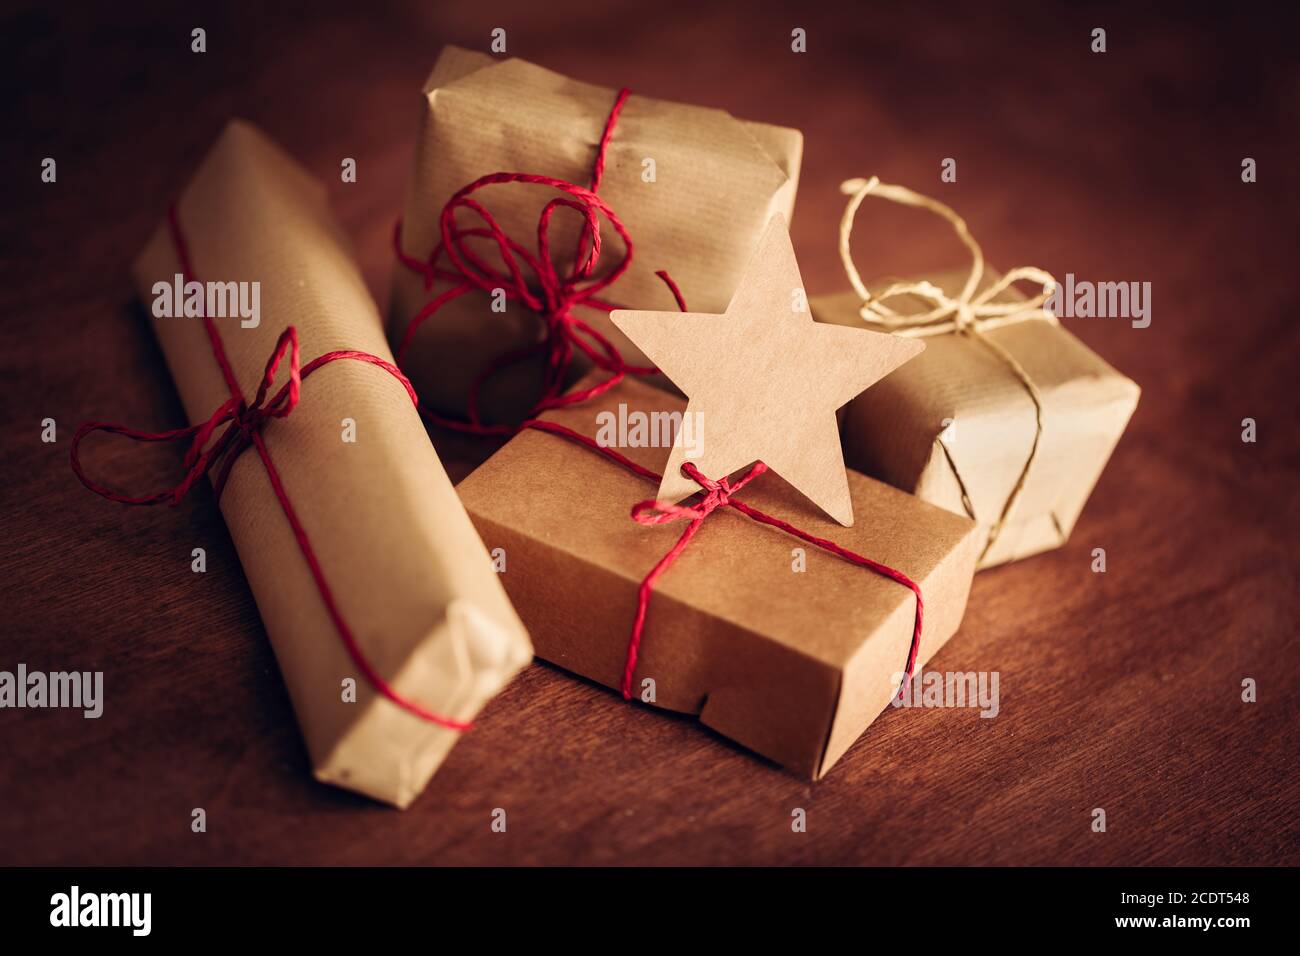 Rustic retro gift, present boxes with tag. Christmas time, eco paper wrap. Stock Photo